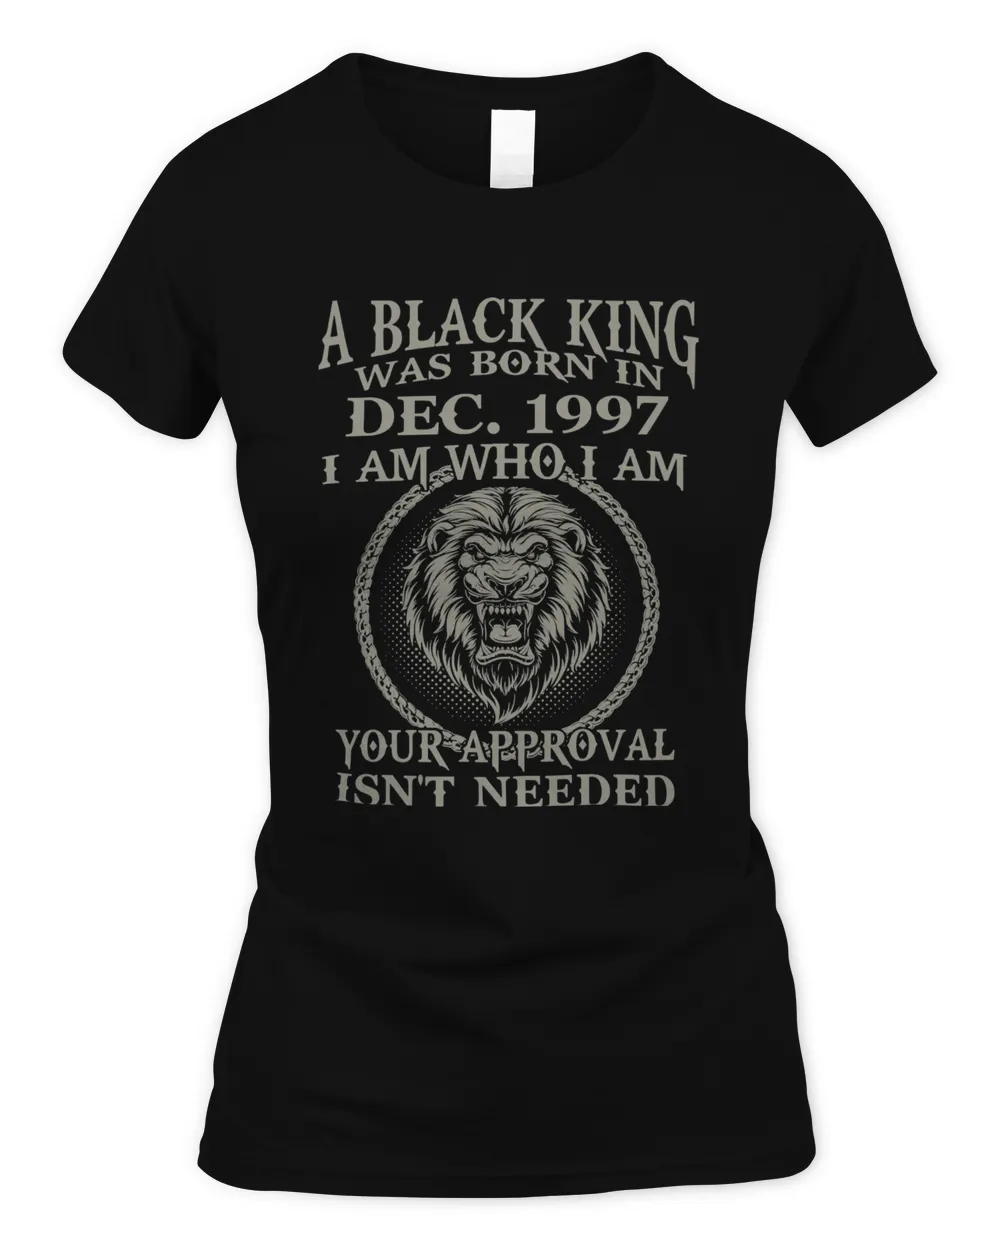 Black King Are Born In DECEMBER 1997. Black King Was Born In DECEMBER 1997 Classic T-Shirt